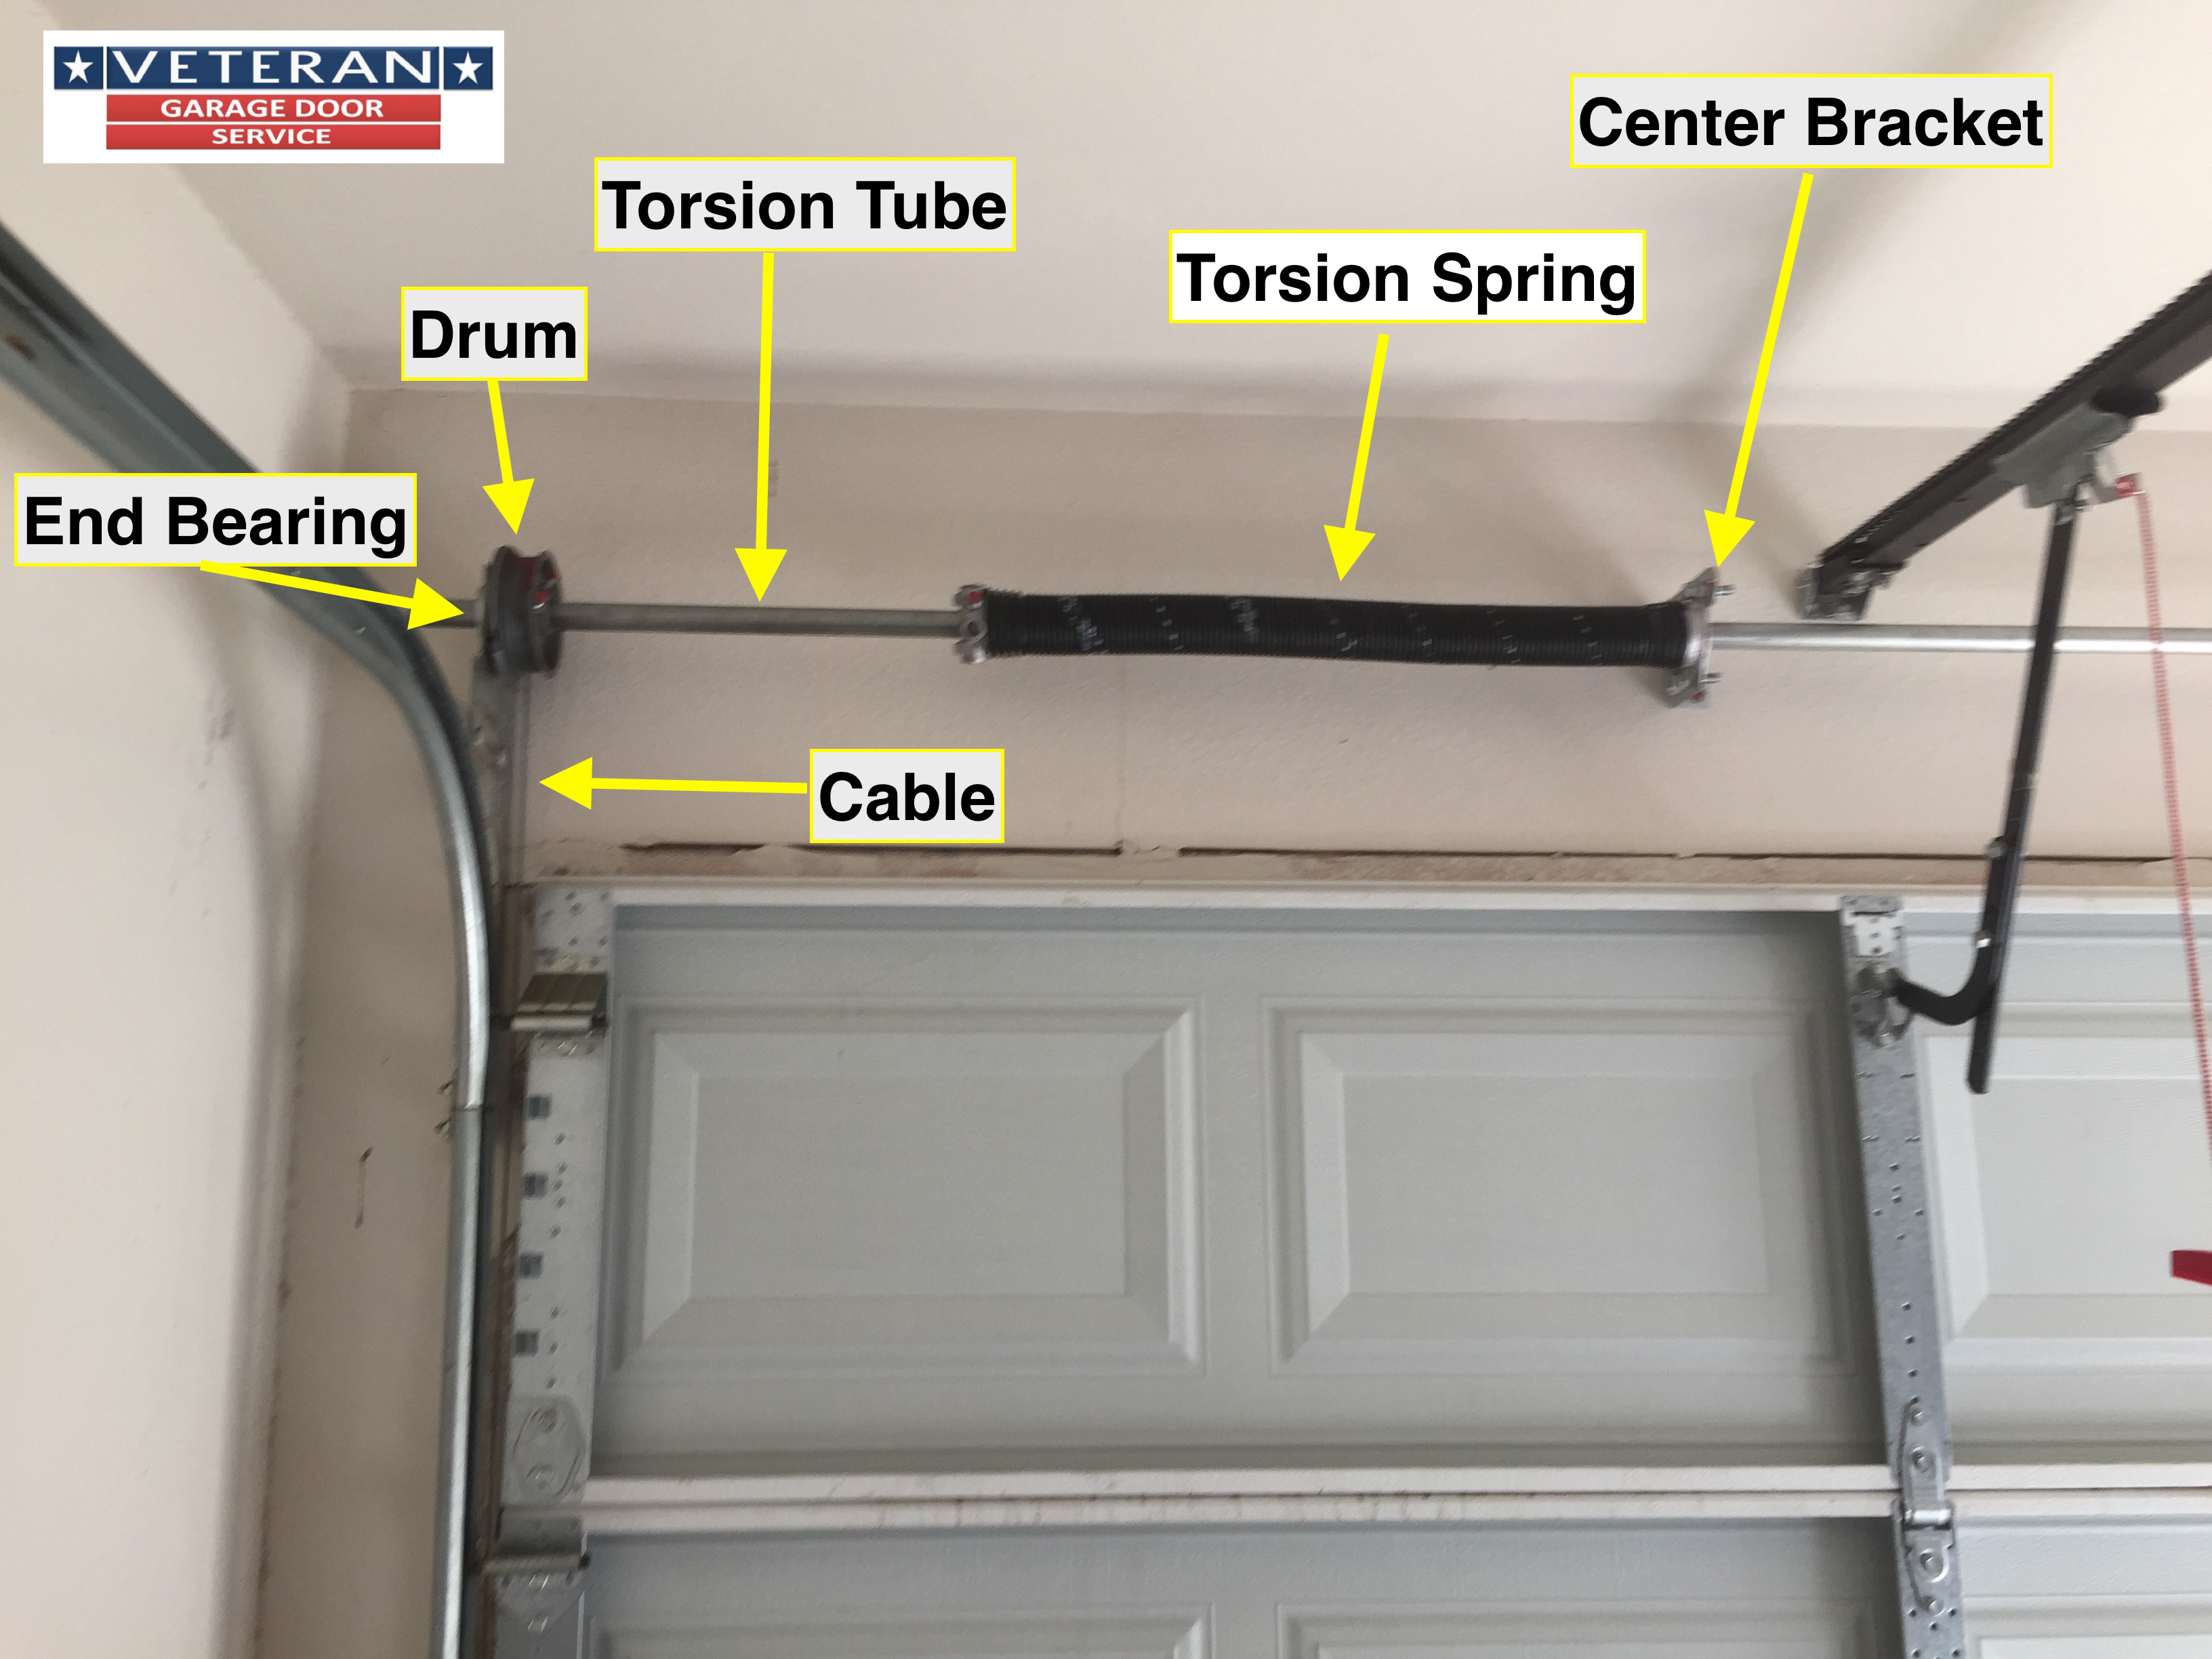 Should I Have 1 Or 2 Torsion Springs On My Garage Door Coachman pertaining to measurements 3264 X 2448